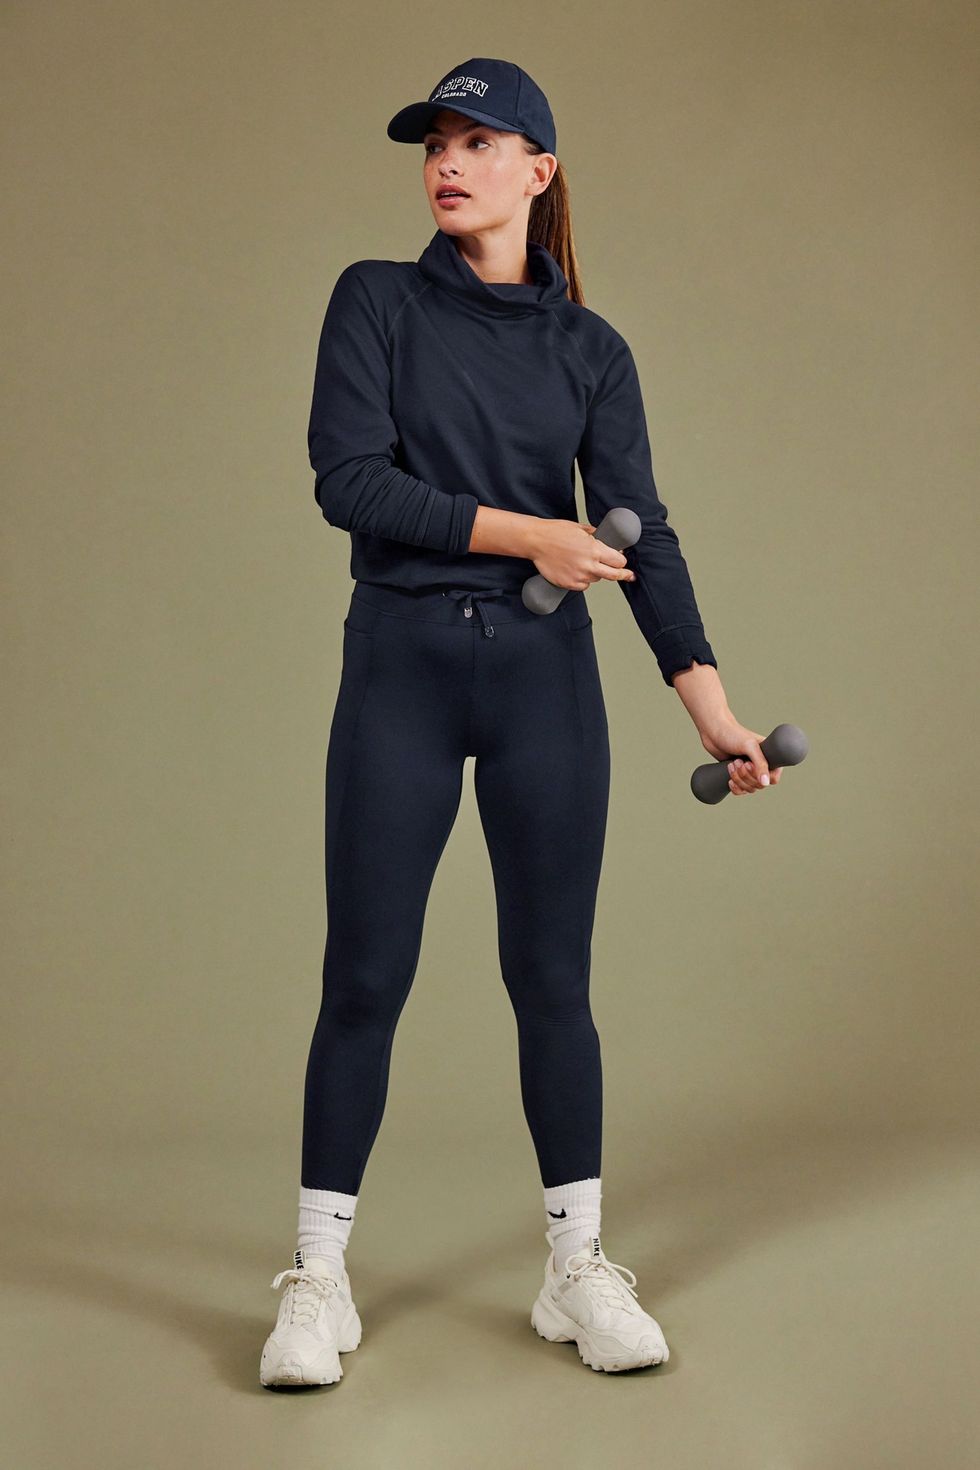 Buy Black Fleece Lined Thermal Tights from Next USA